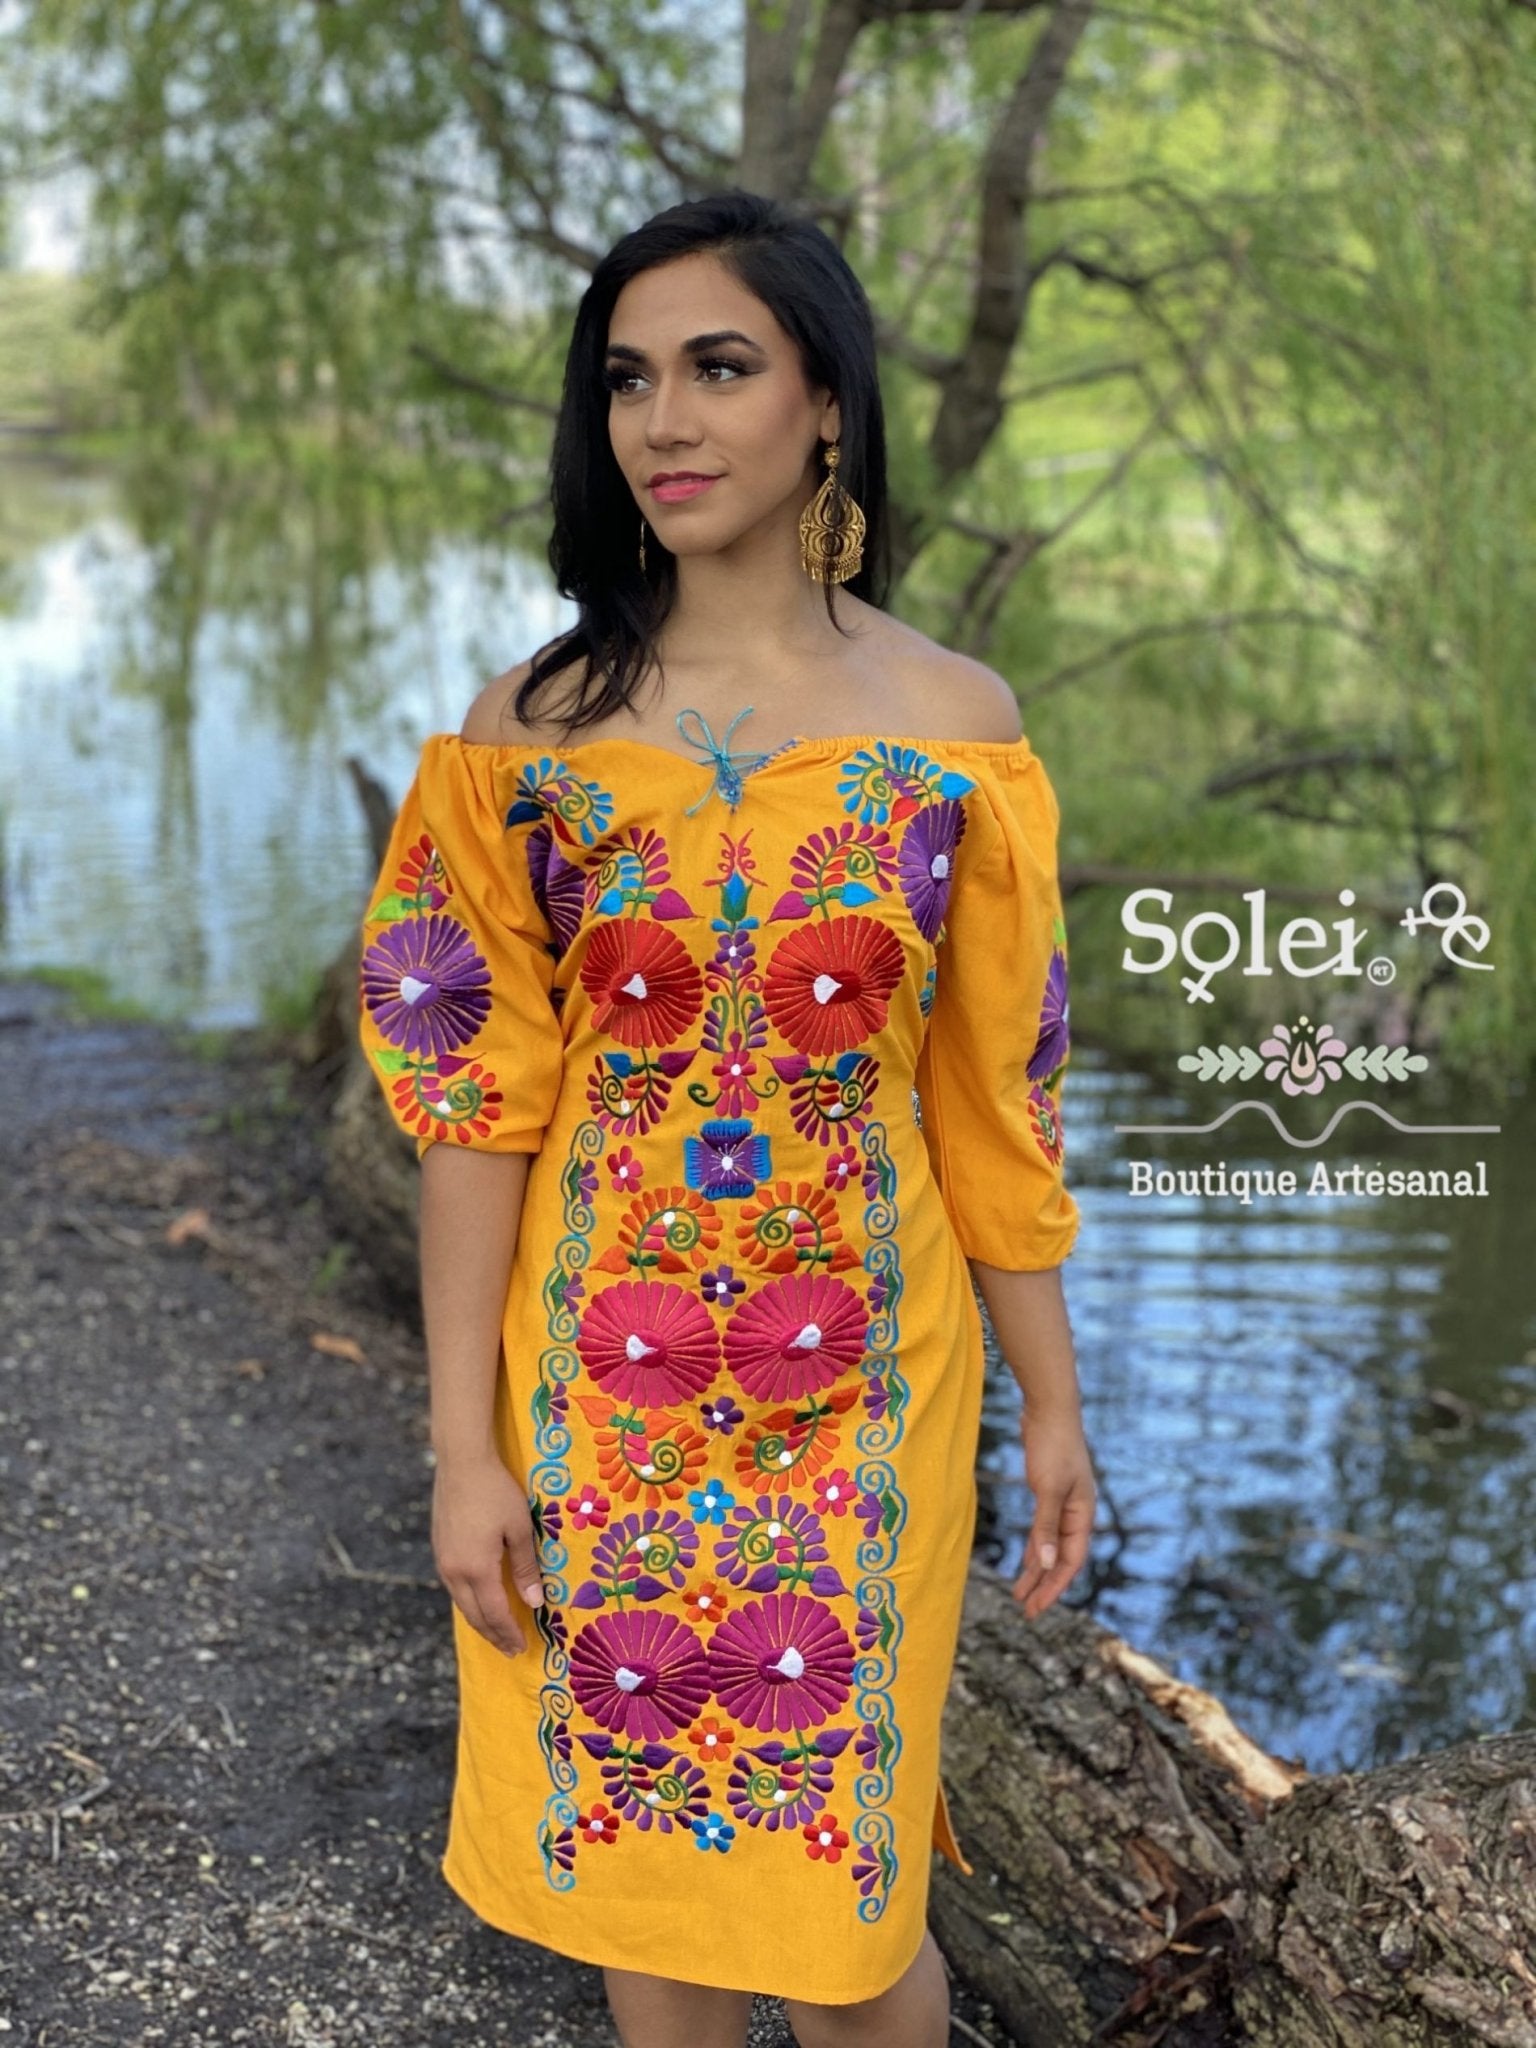 Front Tie Floral Dress. Mexican Floral Dress. Beautiful Embroidered Dress. - Solei Store